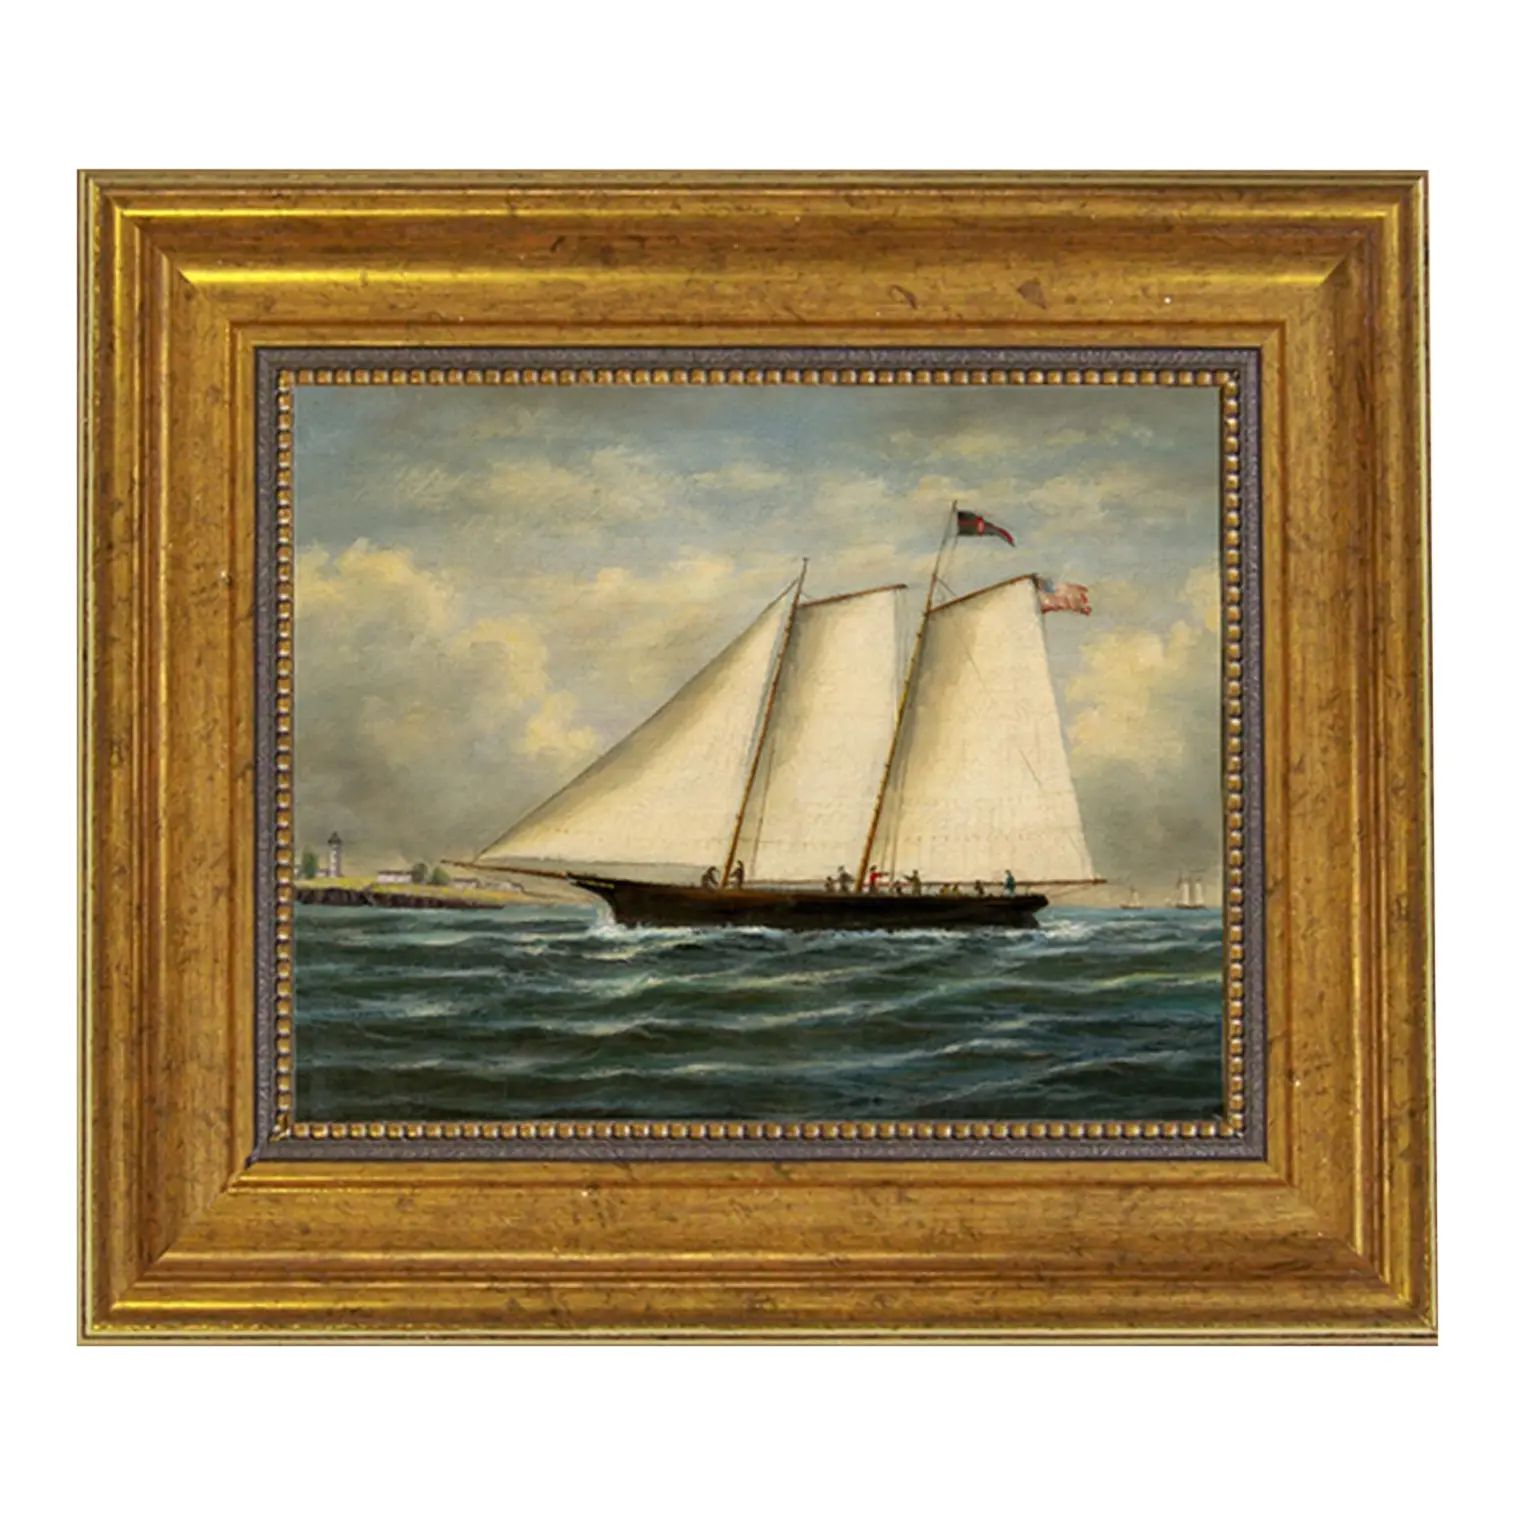 America First Winner America Cup Framed Oil Painting Print on Canvas in Antiqued Gold Frame | Chairish